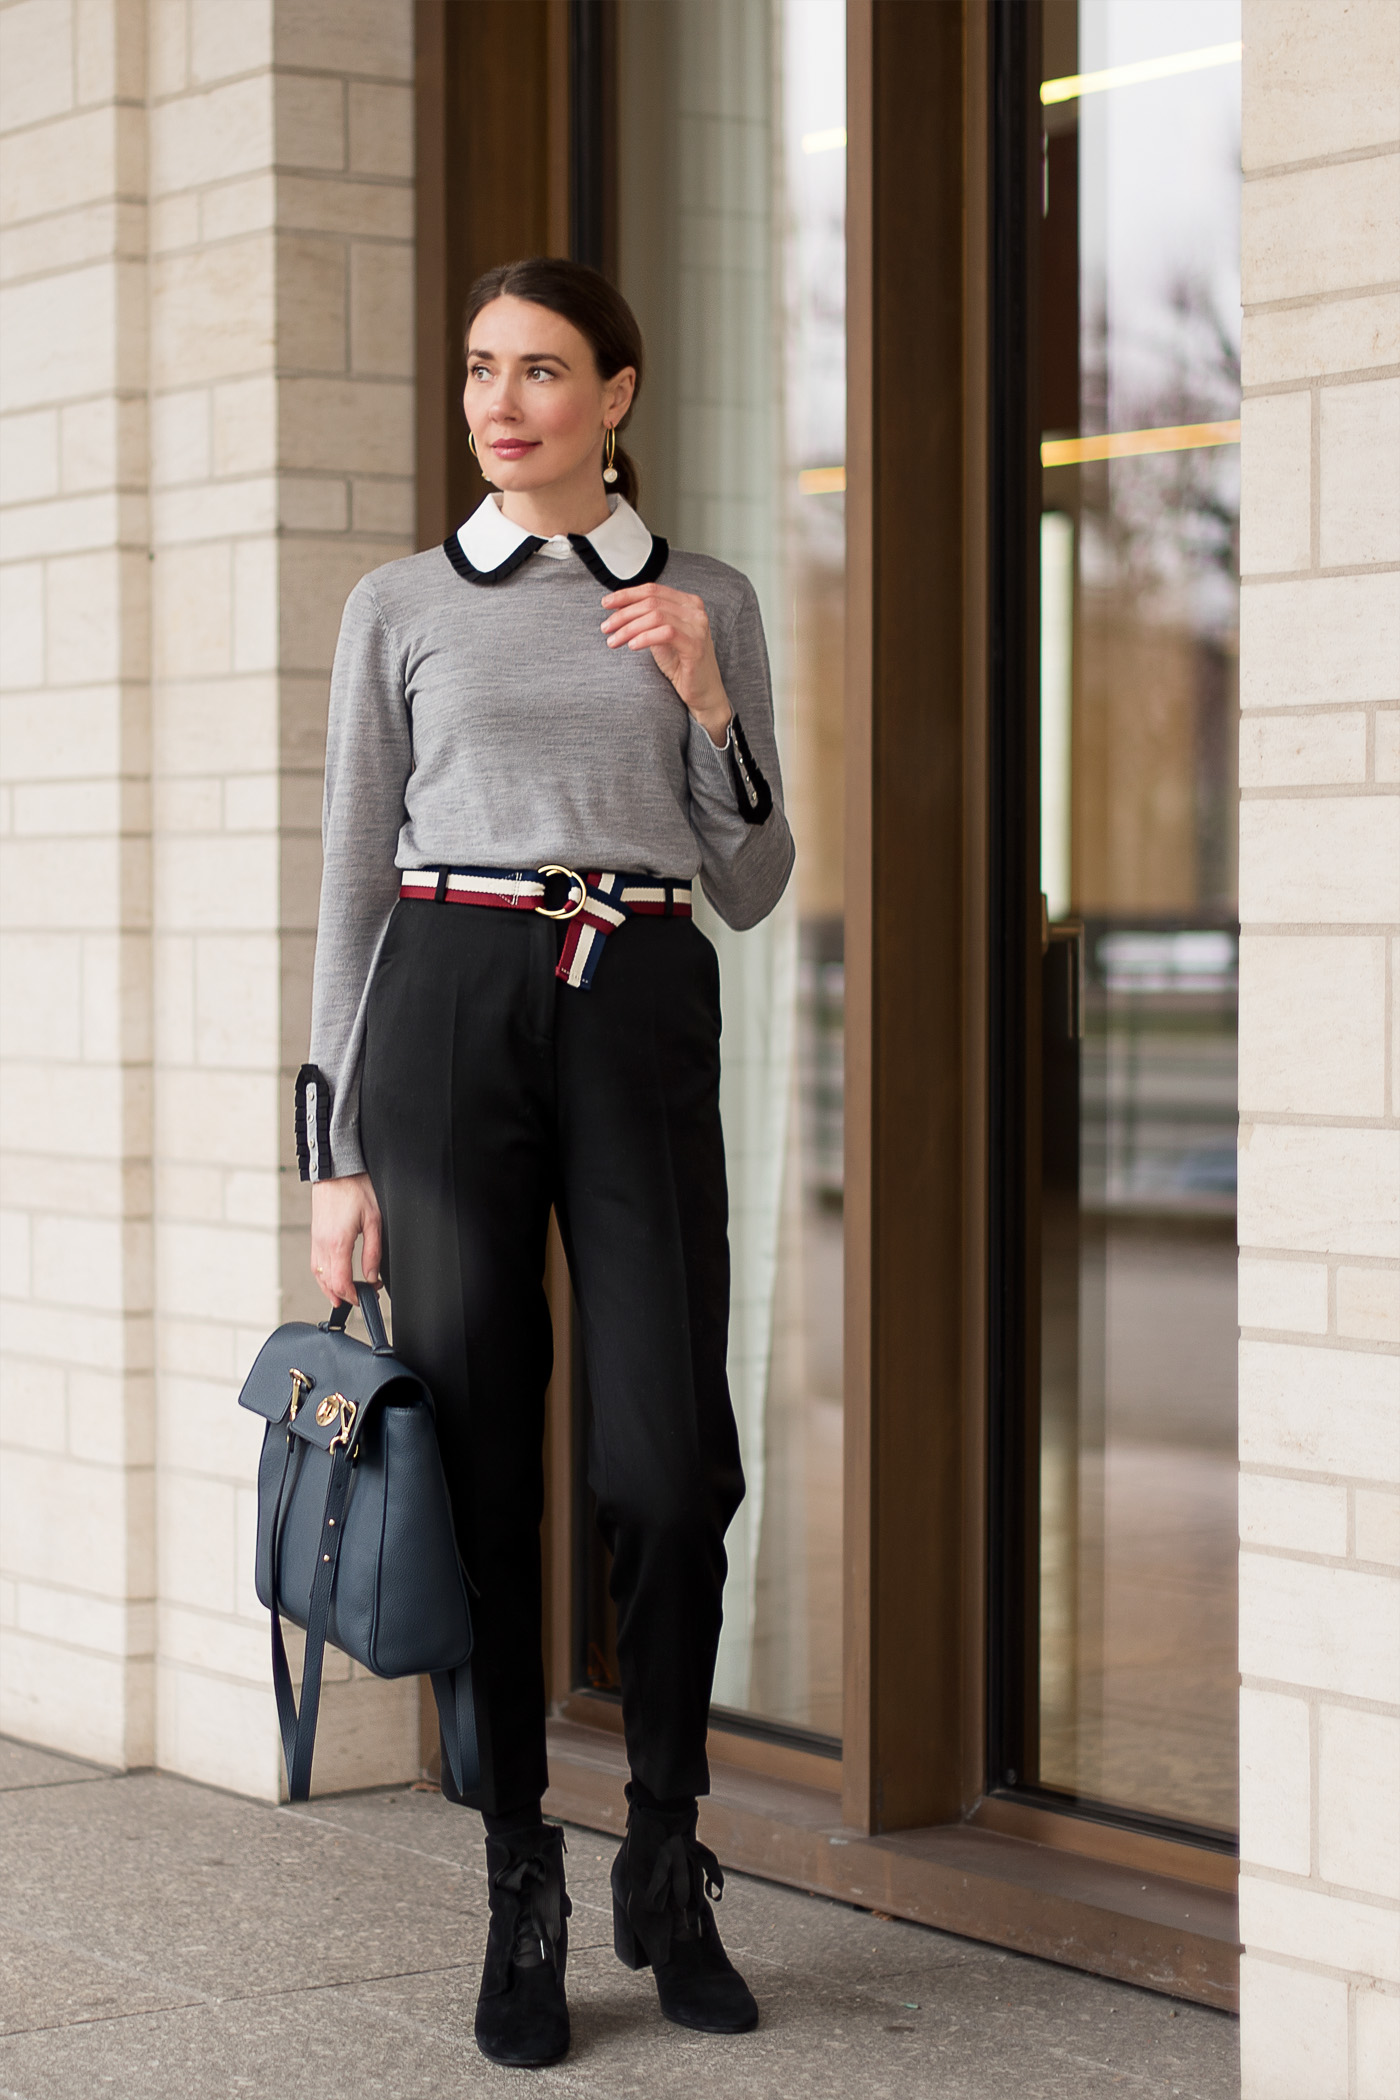 business-outfit-office-look-CLAUDIE-PIERLOT-outfit-winterstyle-fashionblog-businesshose-kennel-und-schmneger-stiefeletten